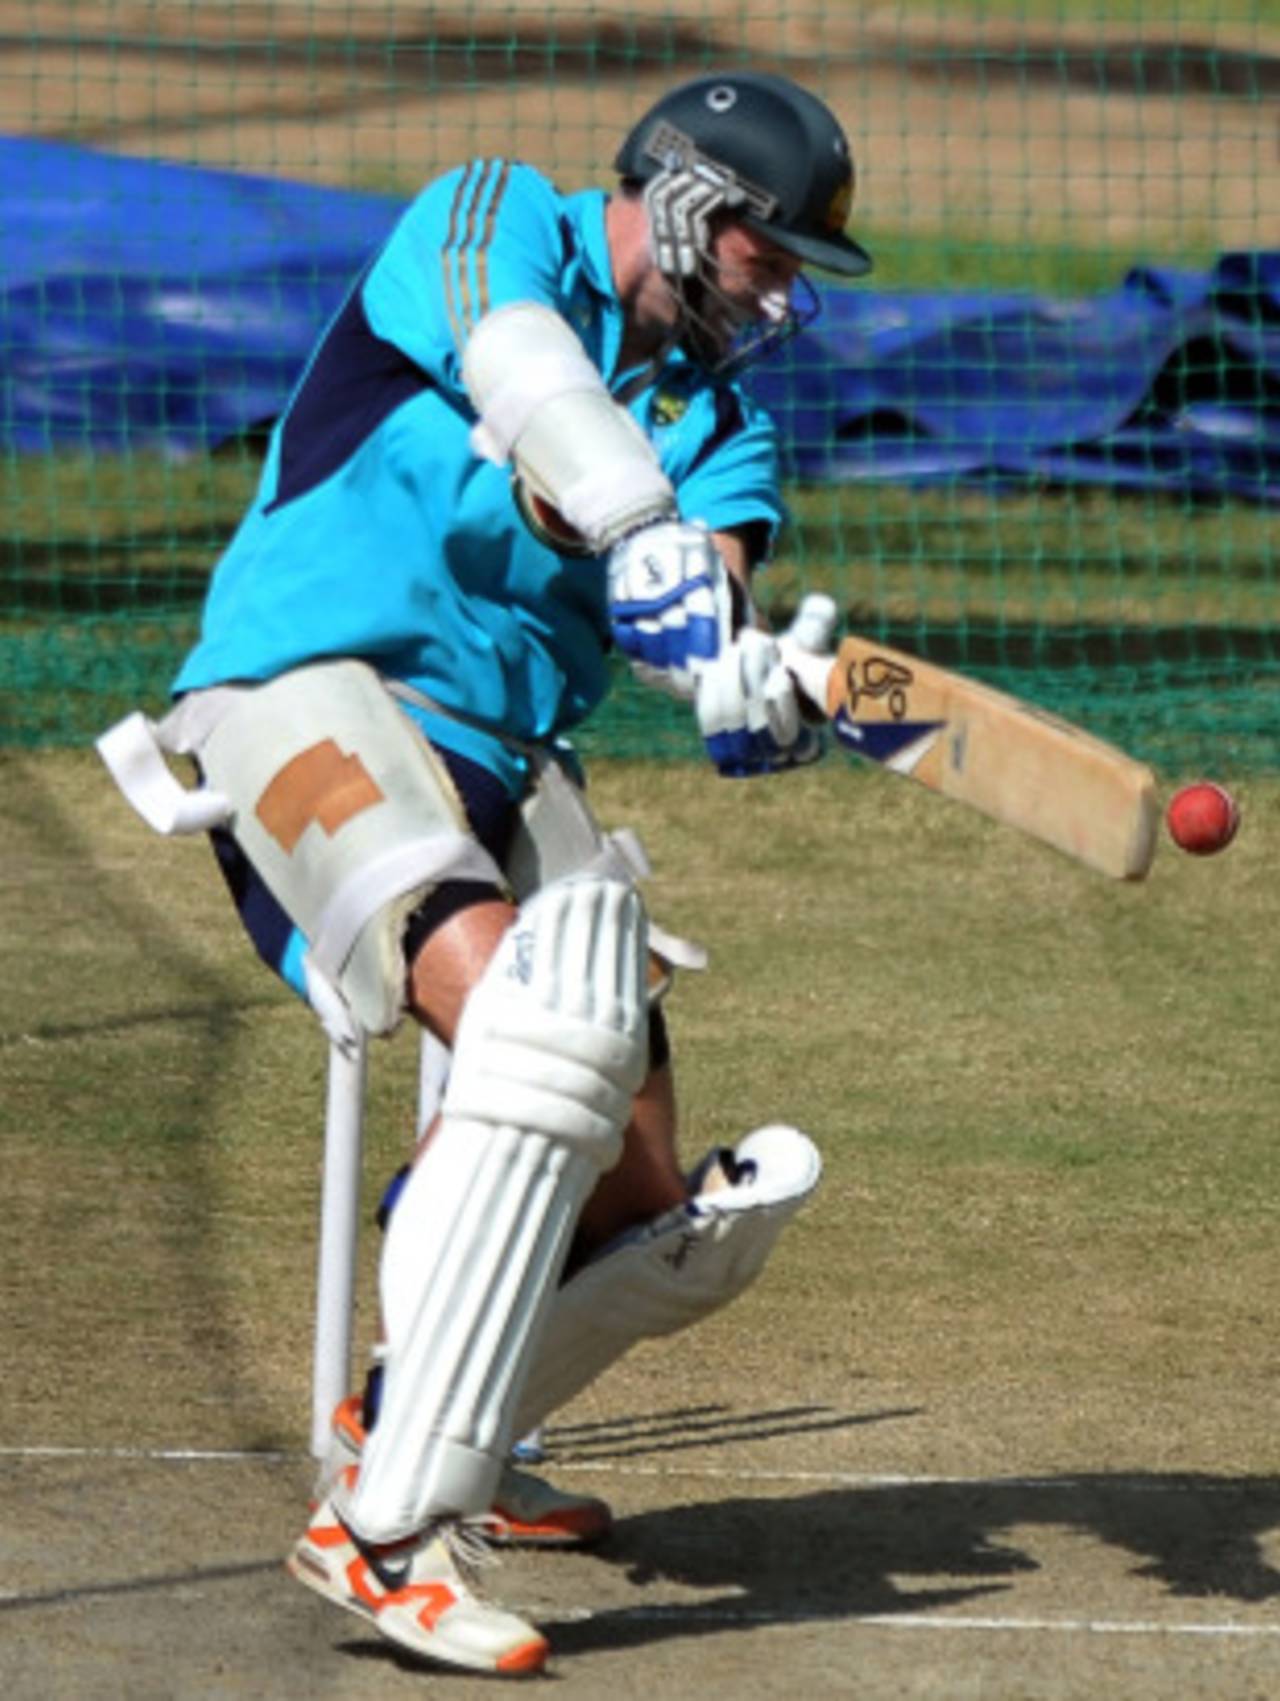 Michael Hussey strokes one on the off side in the nets, Mohali, September 30, 2010